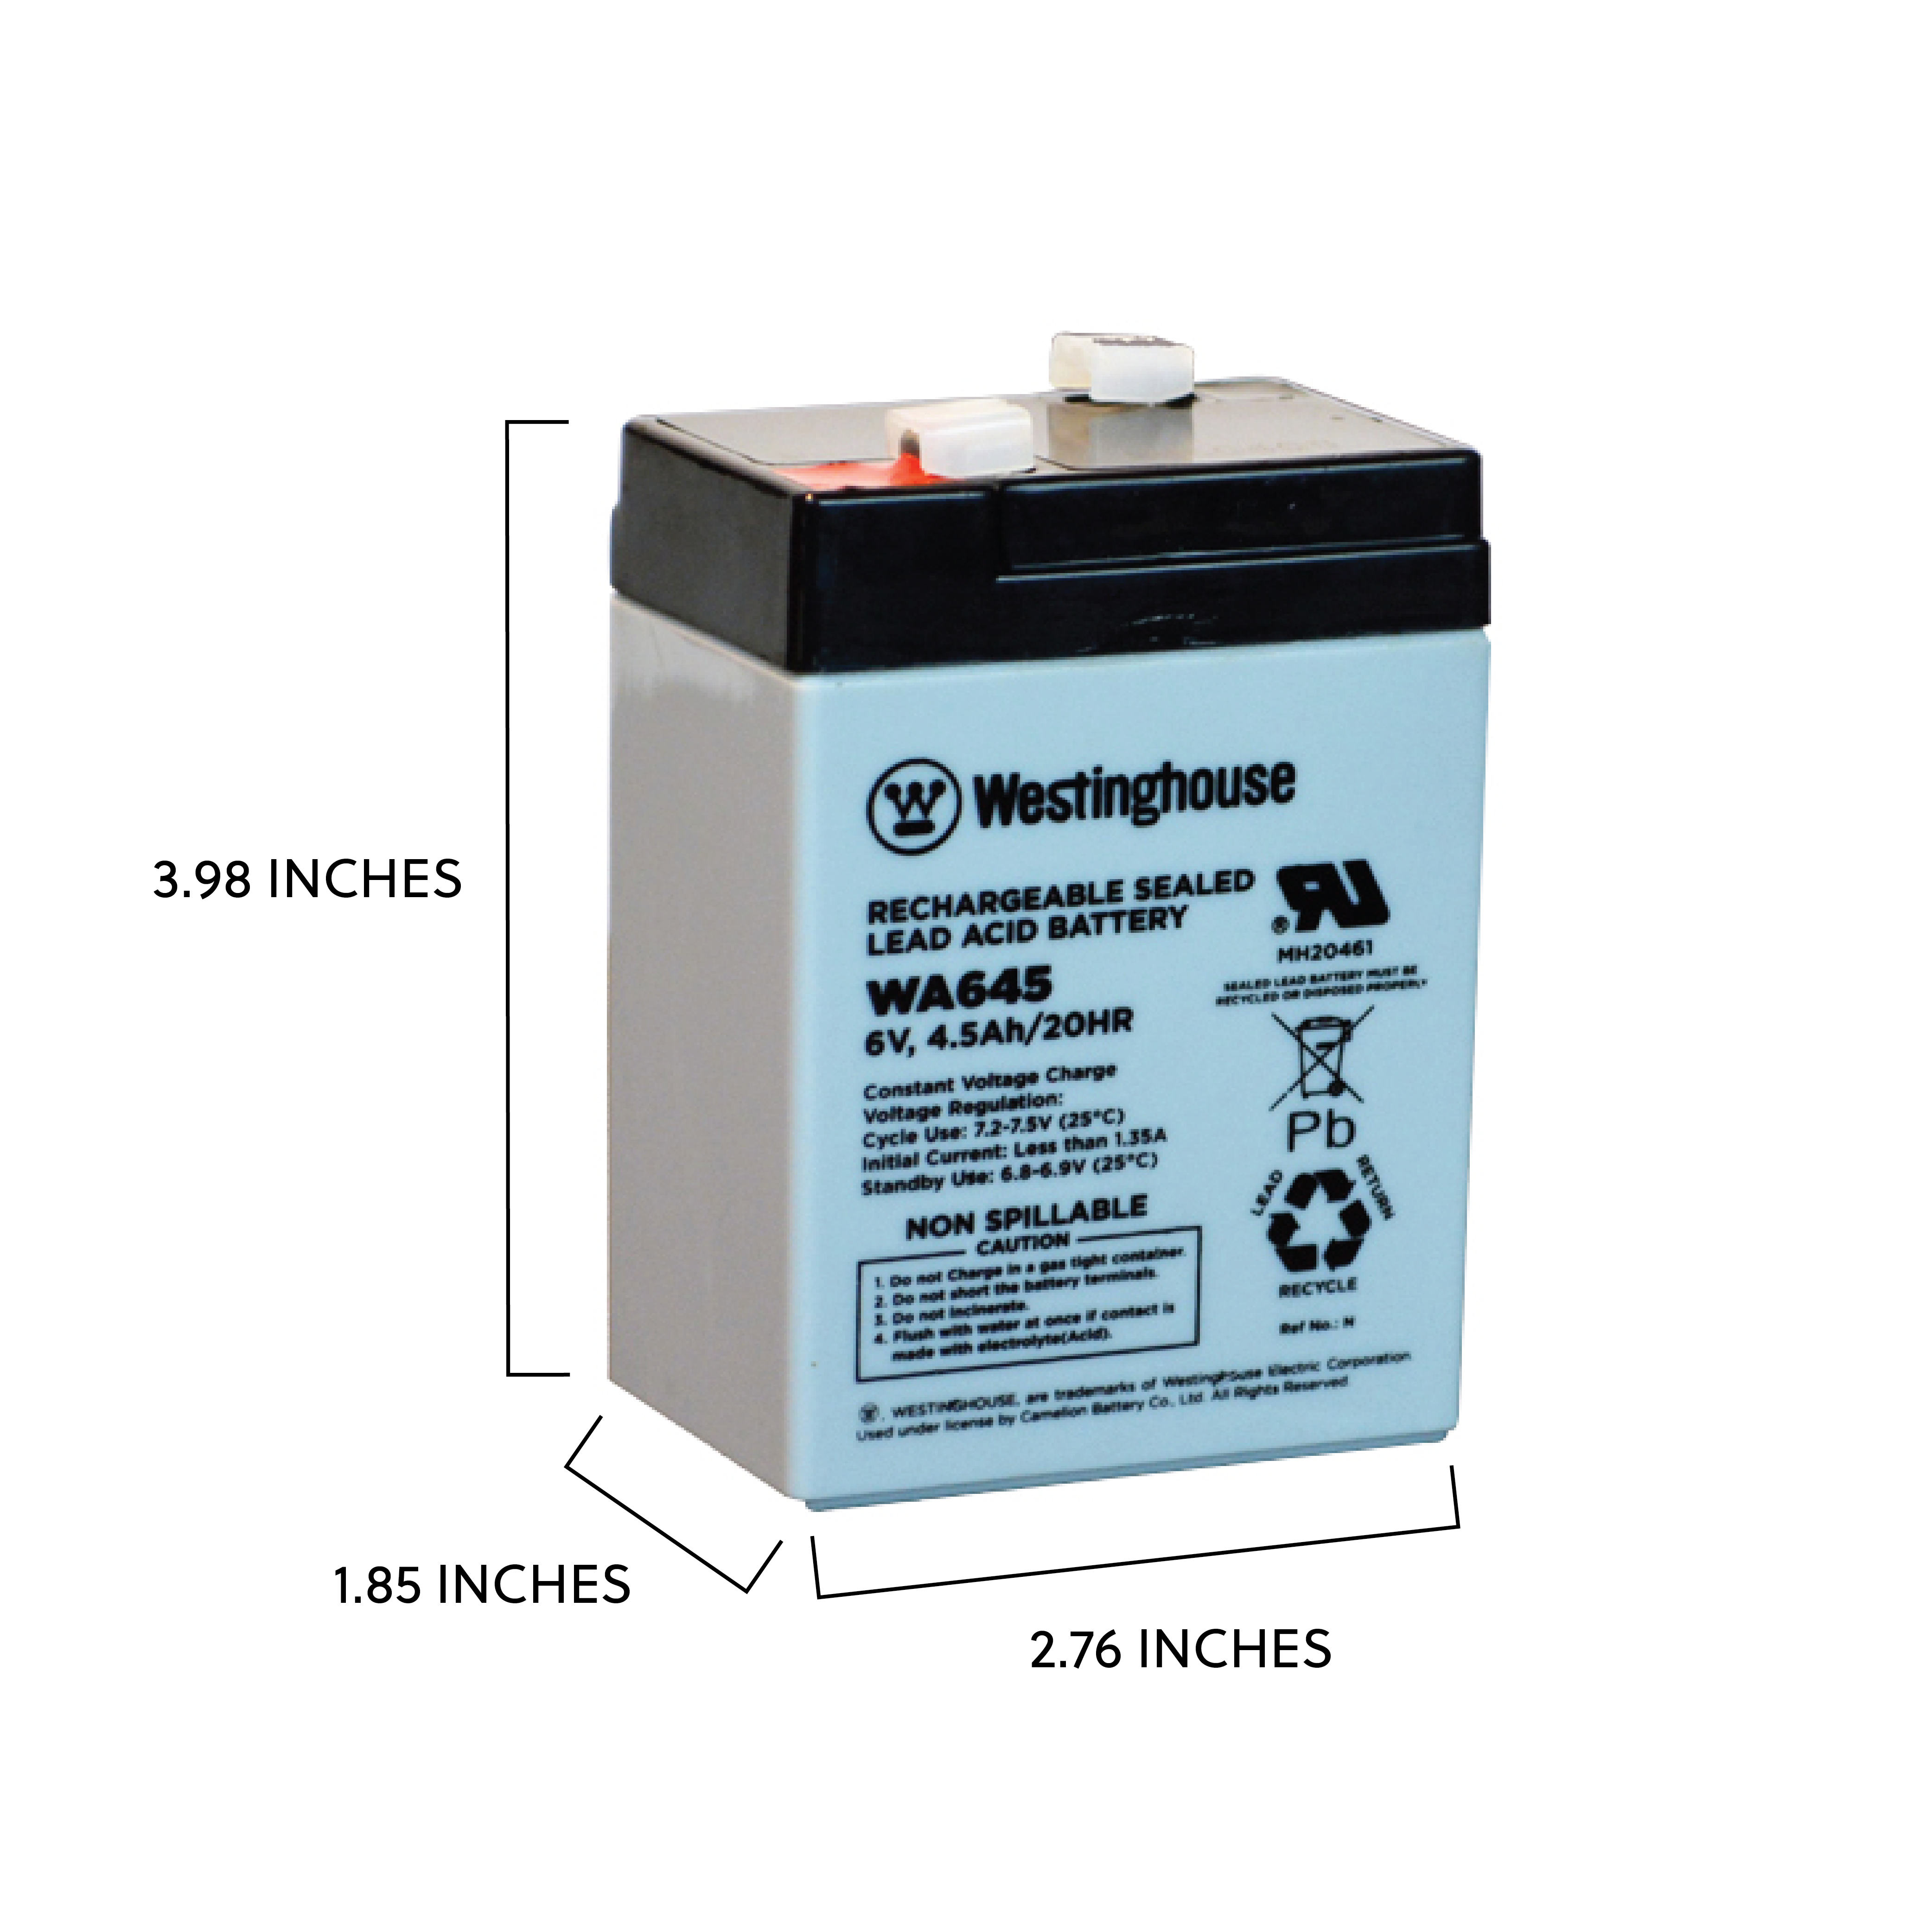 6V 4.5Ah Rechargeable Battery for UPS, Backups, Exit Signs, Counting Scales